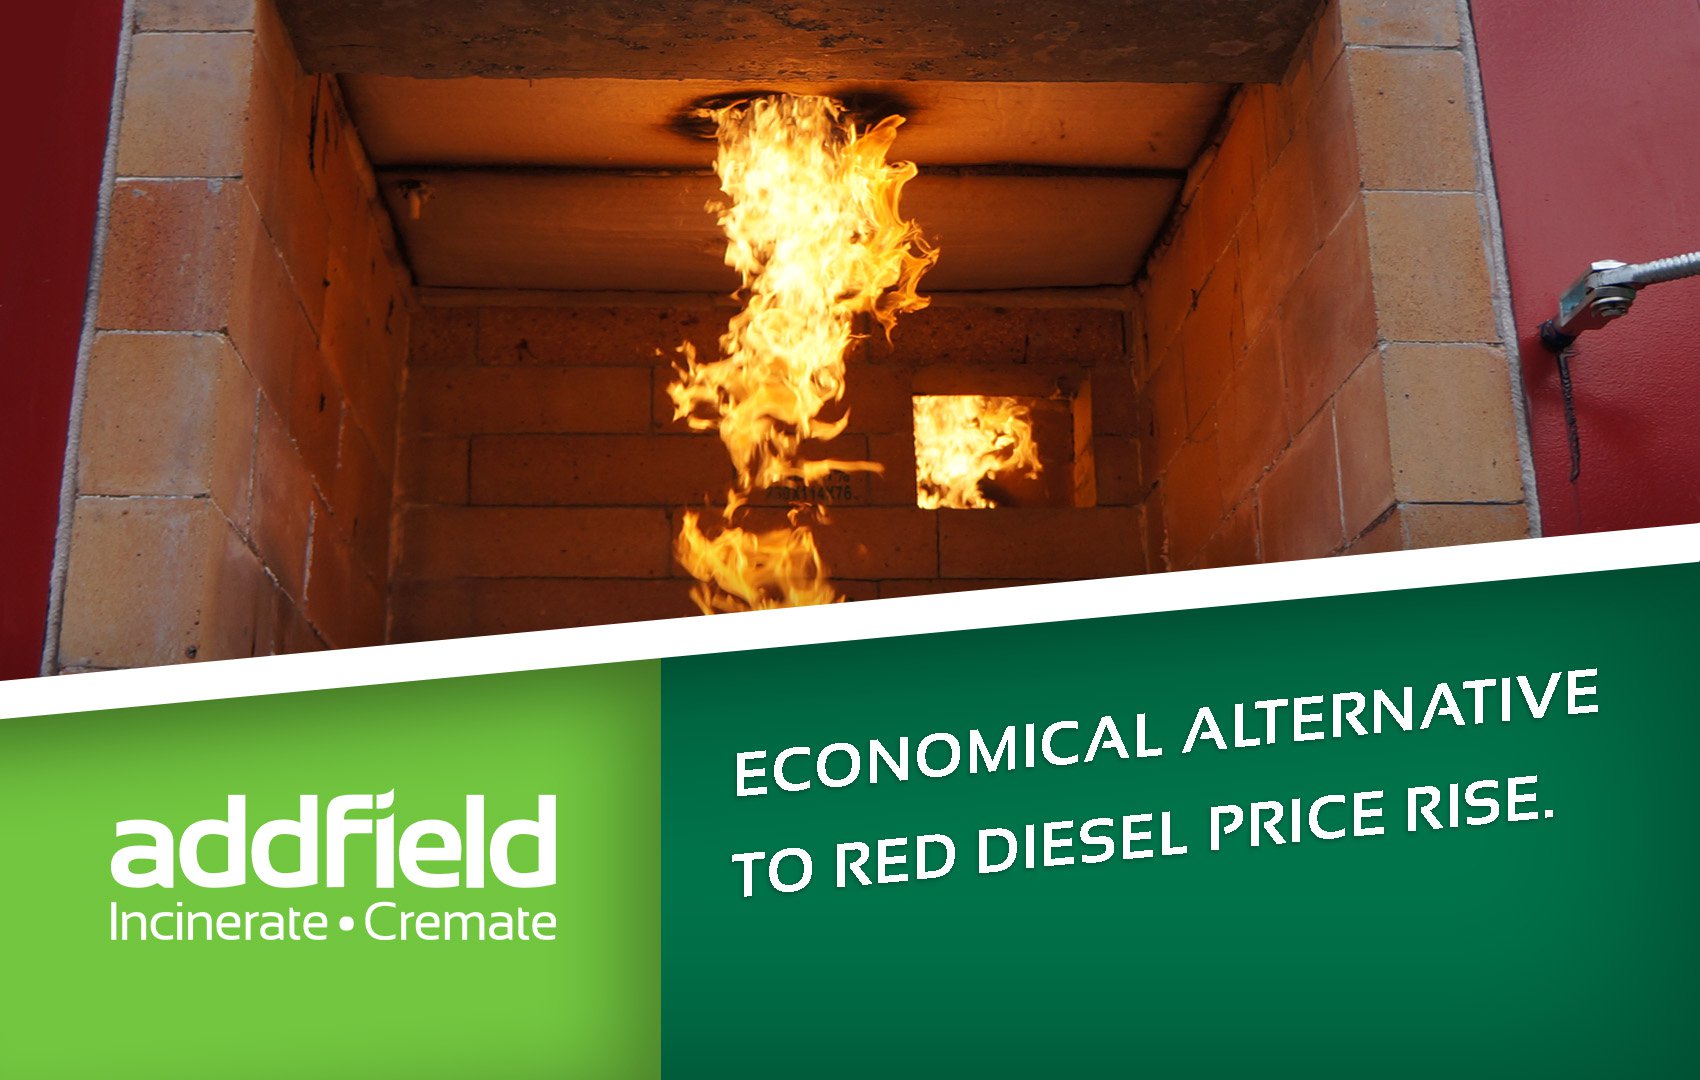 red diesel alternatives now available